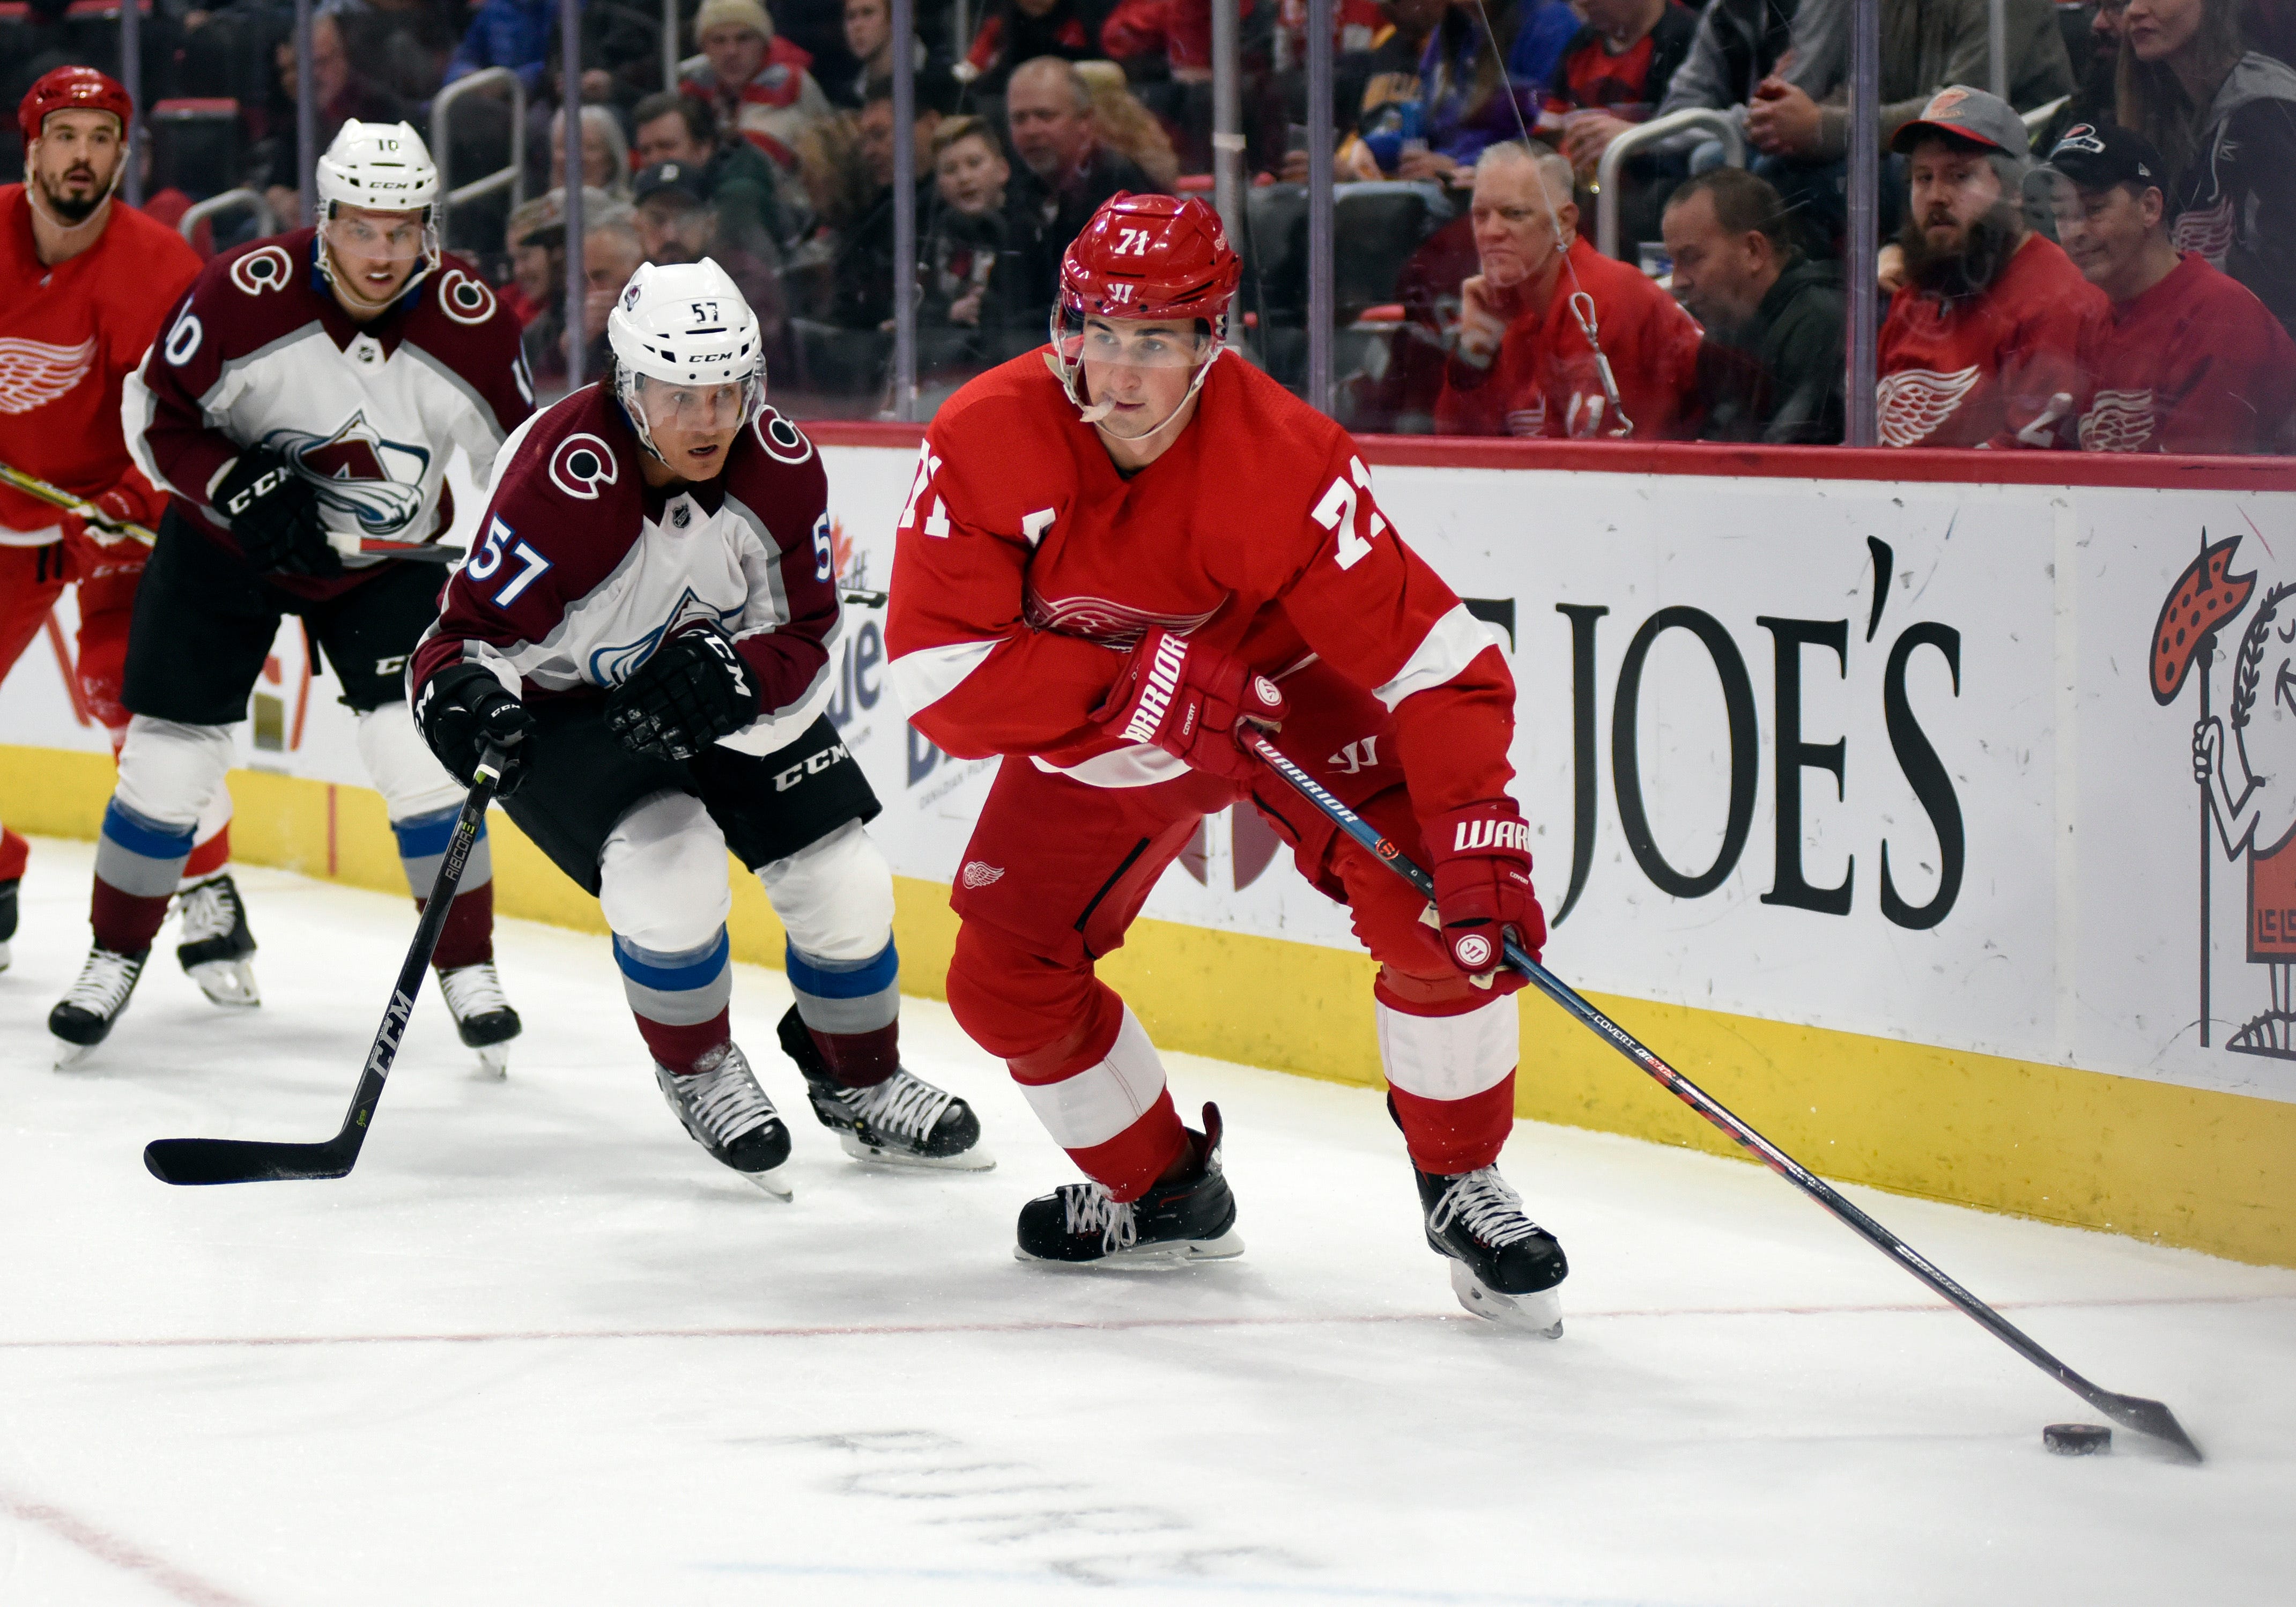 Detroit Red Wings center Dylan Larkin, right, moves the puck away from Colorado Avalanche left wing Gabriel Bourque in the first period of the game in Detroit, Sunday, Dec. 2, 2018. The Red Wings lost, 2-0.